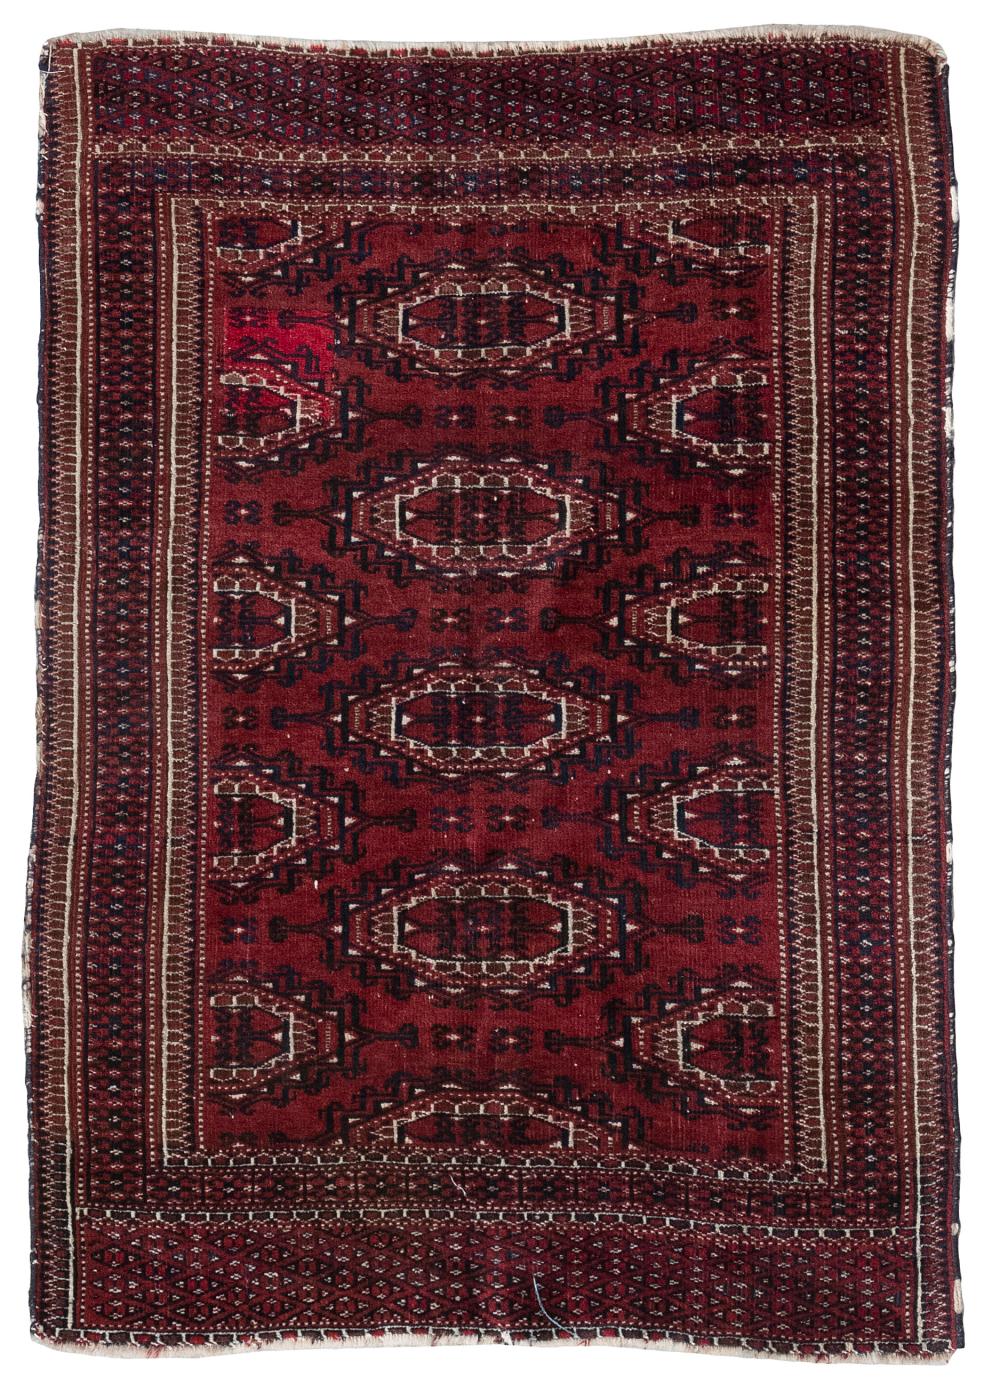 CHODOR SCATTER RUG 2 10 X 34cc4d